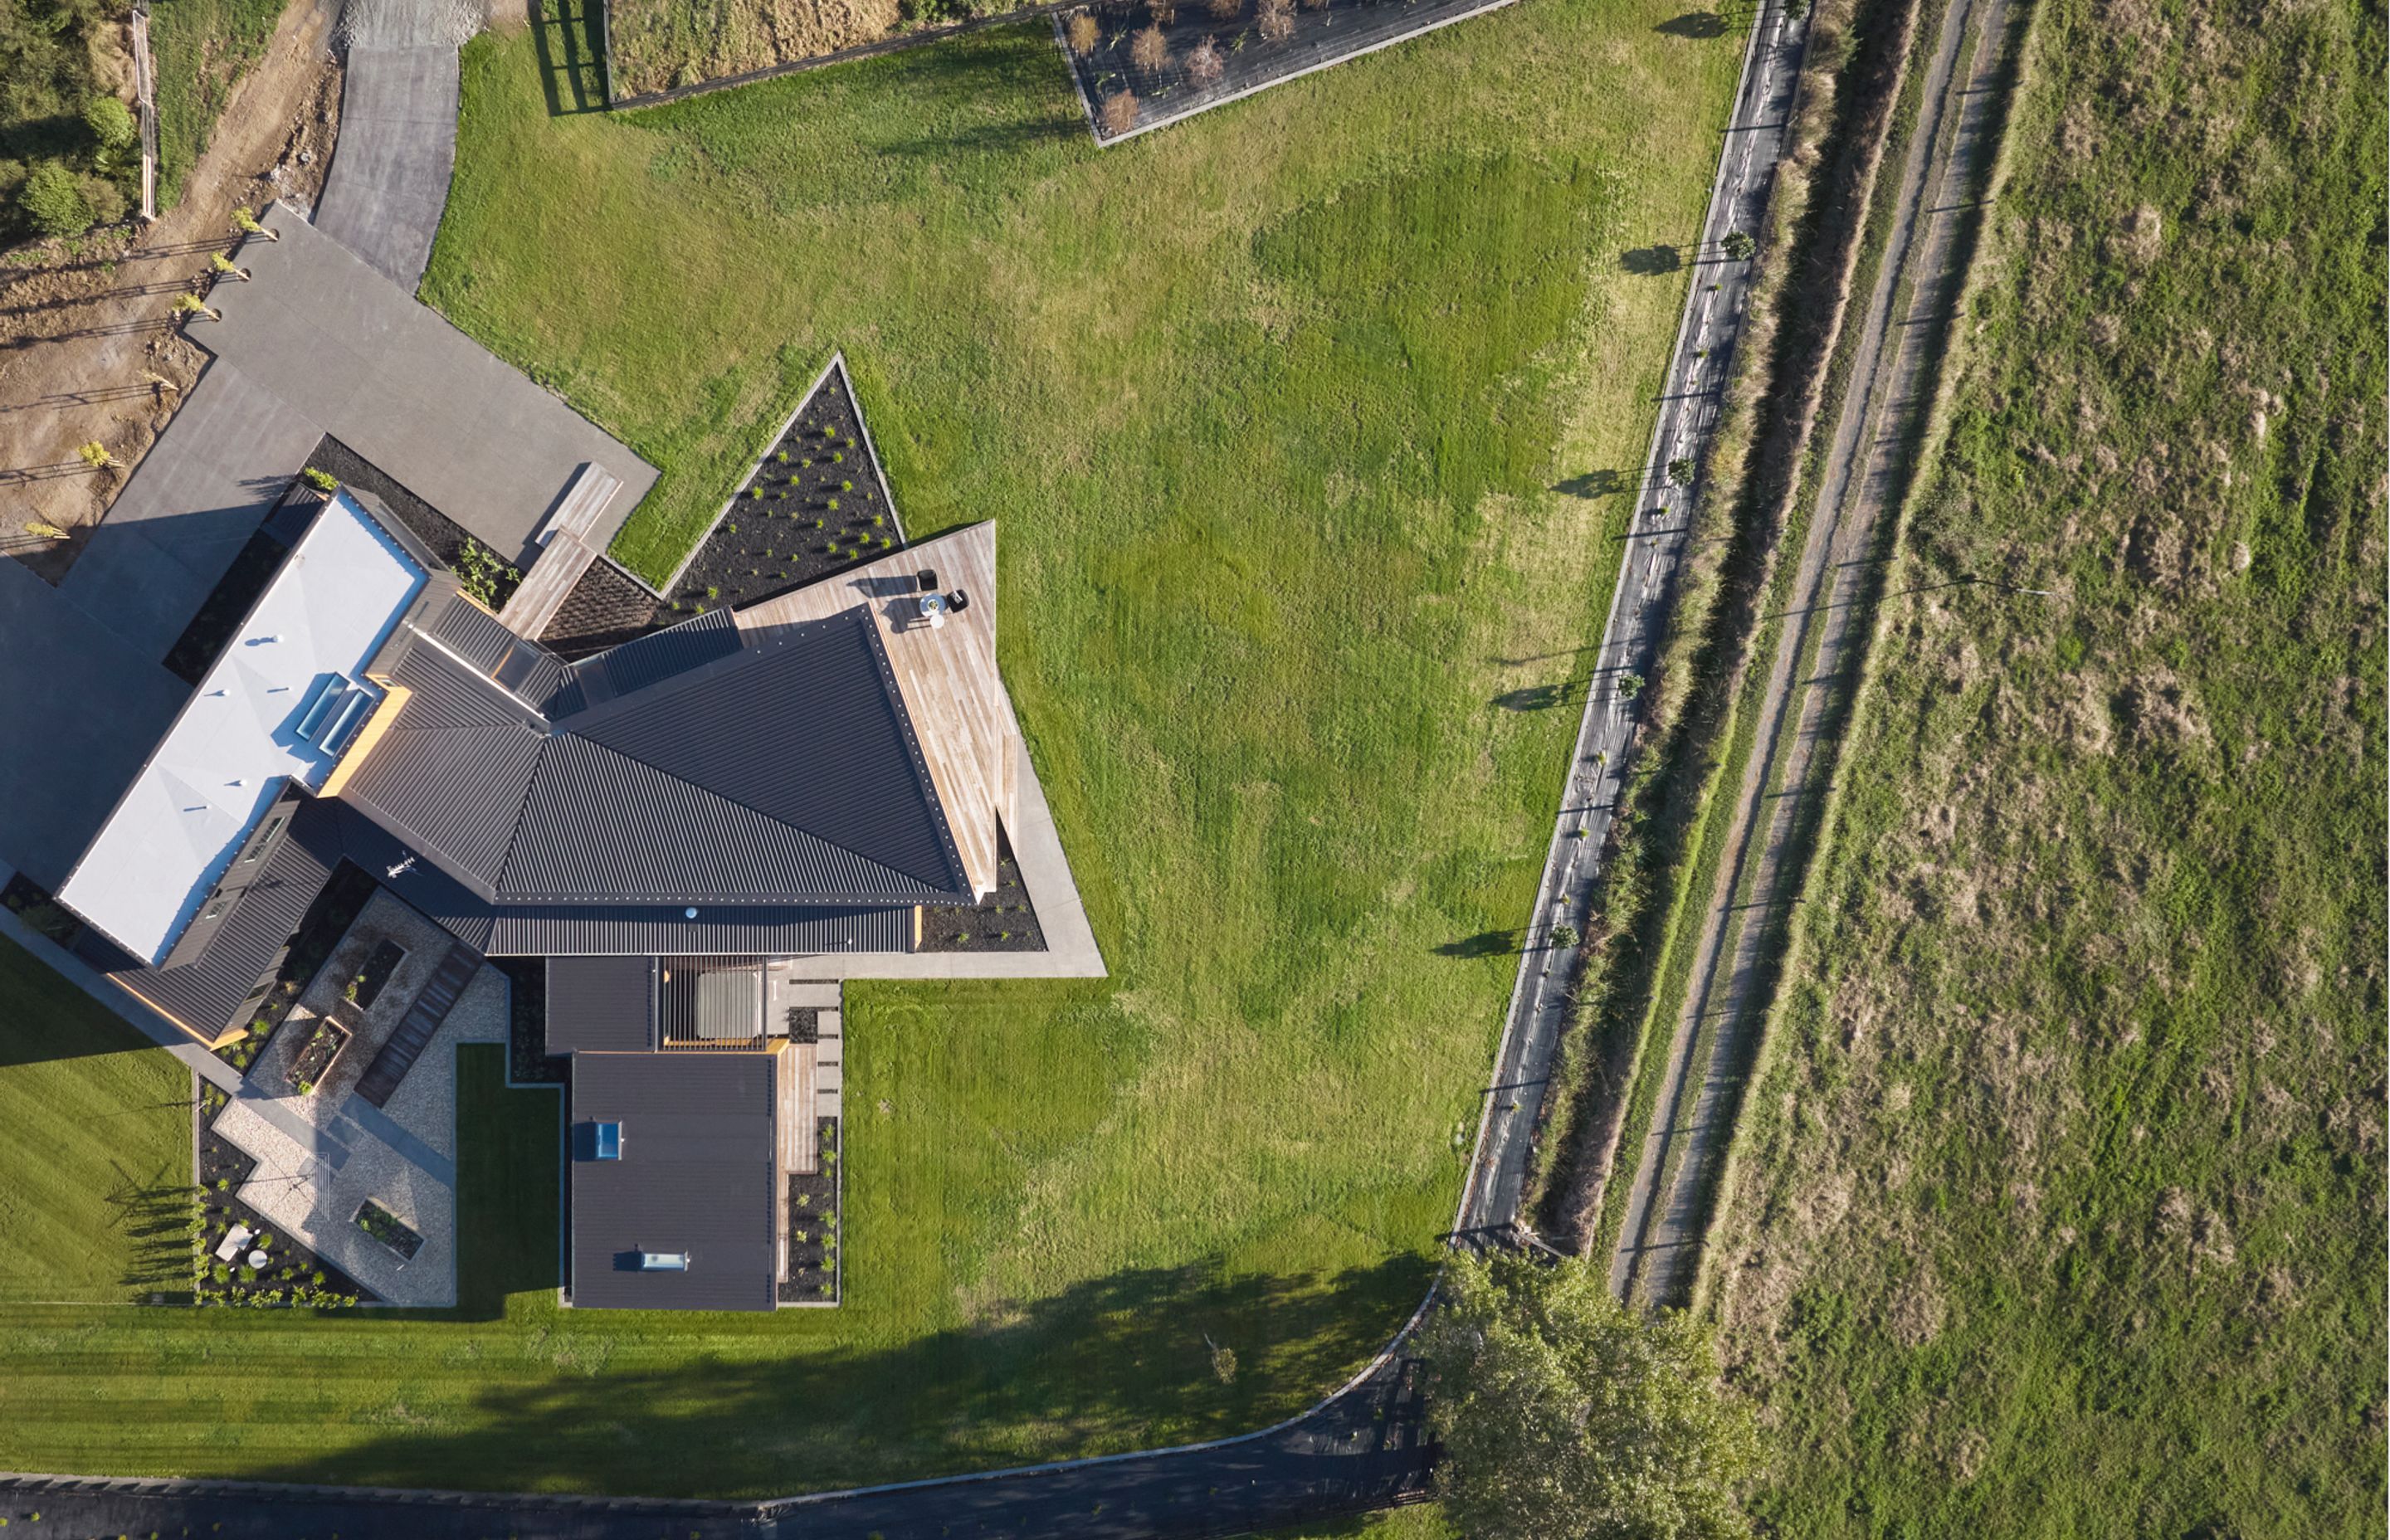 A bird's-eye view of the design crafted by Turner Road Architecture.